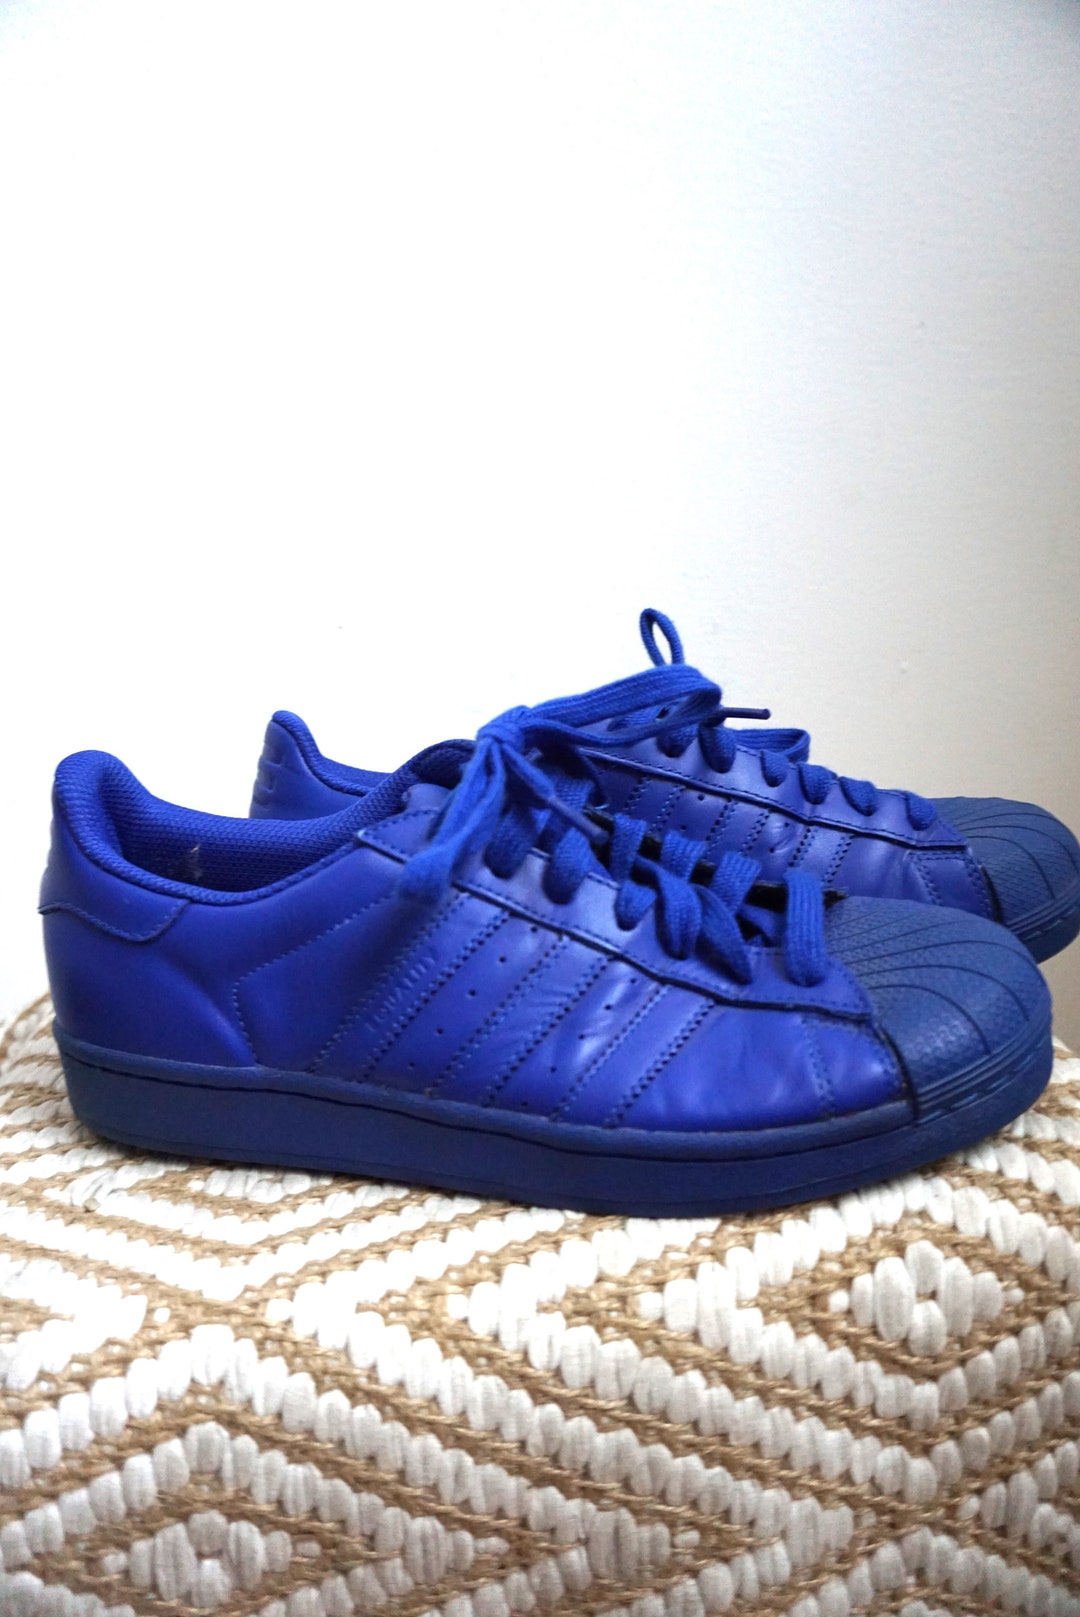 Vintage ADIDAS Blue Leather Sneakers / Boots / Shoes / Shoe / - Etsy